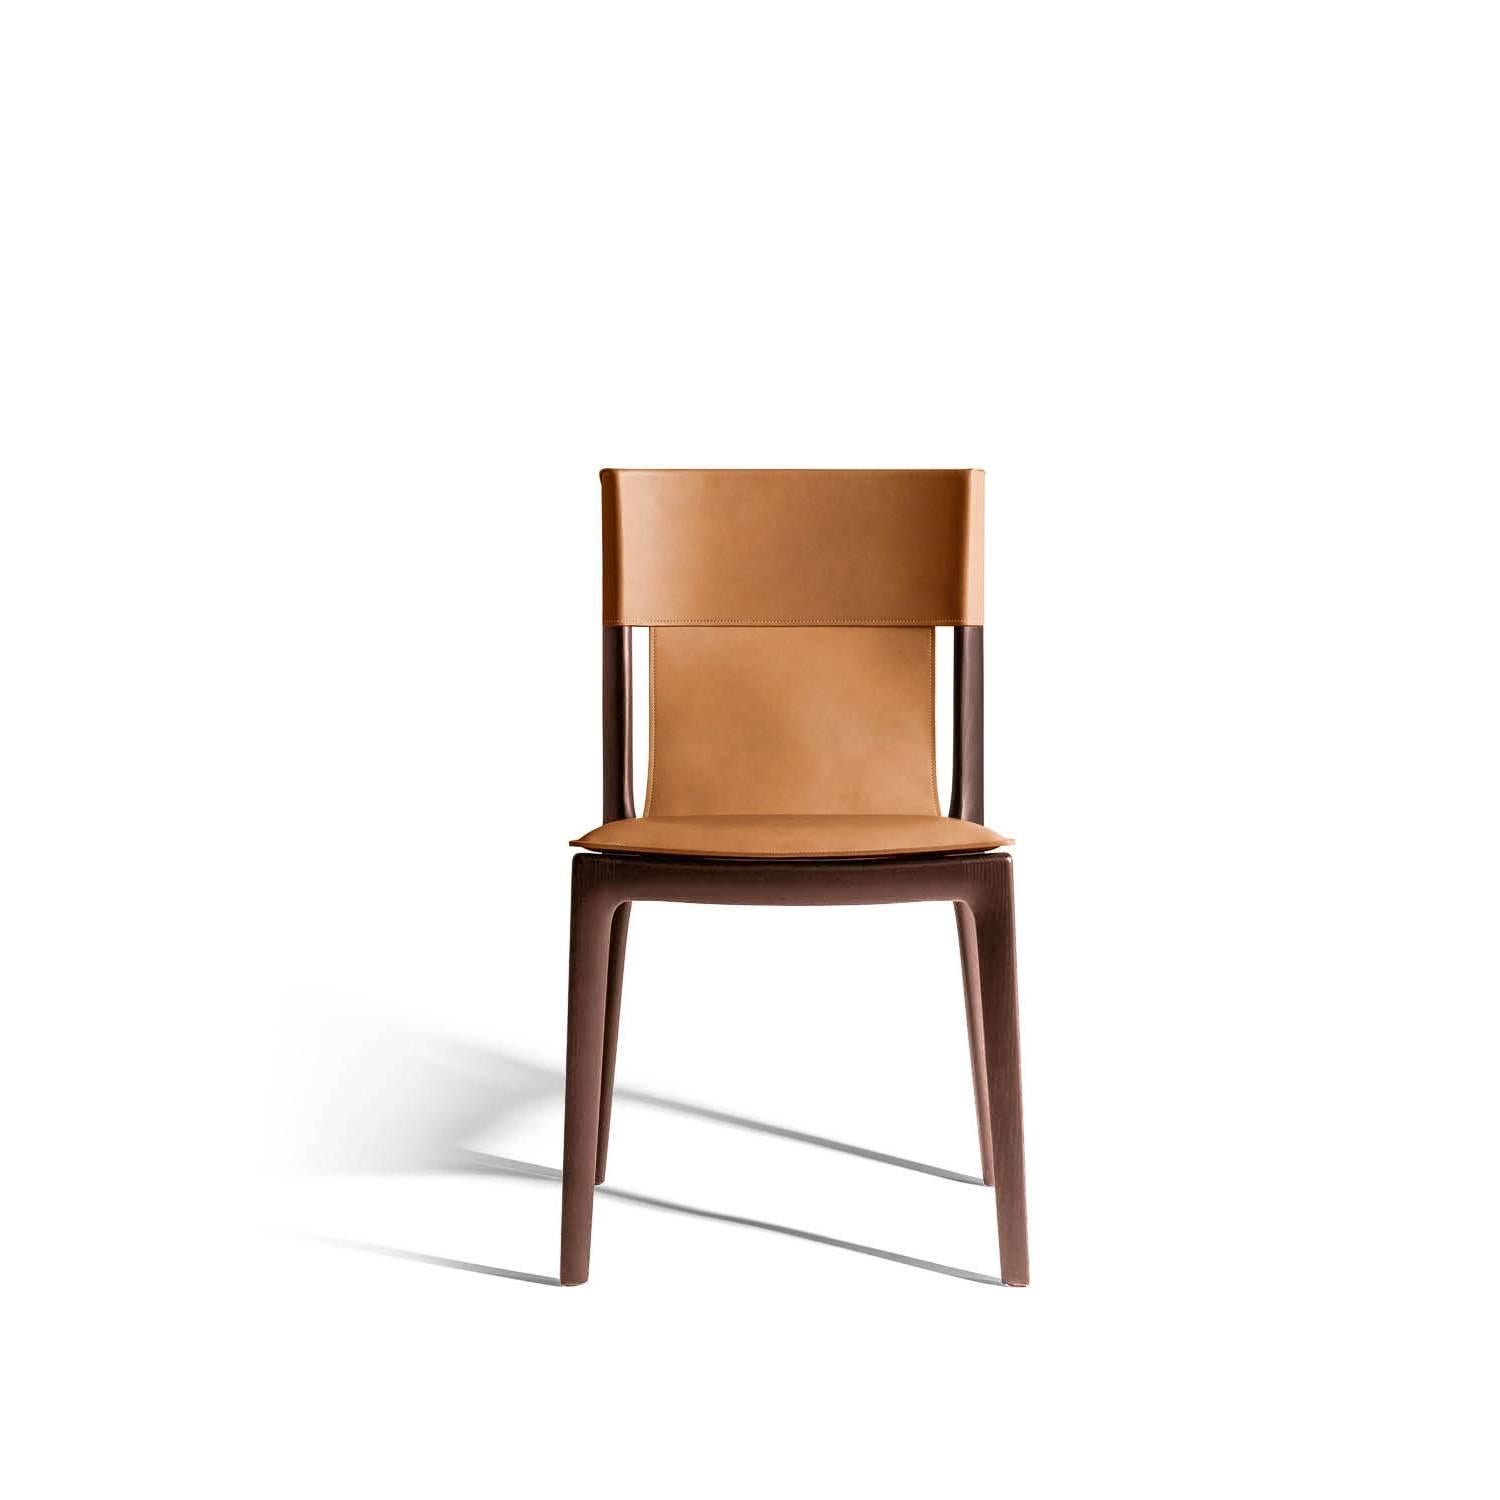 The Isadora chair is inspired by the grace of Isadora Duncan, pioneer of contemporary dance. Created by Roberto Lazzeroni, its original design is shaped by the seamless combination of wood and saddle-leather. The Isadora chair has a solid wood